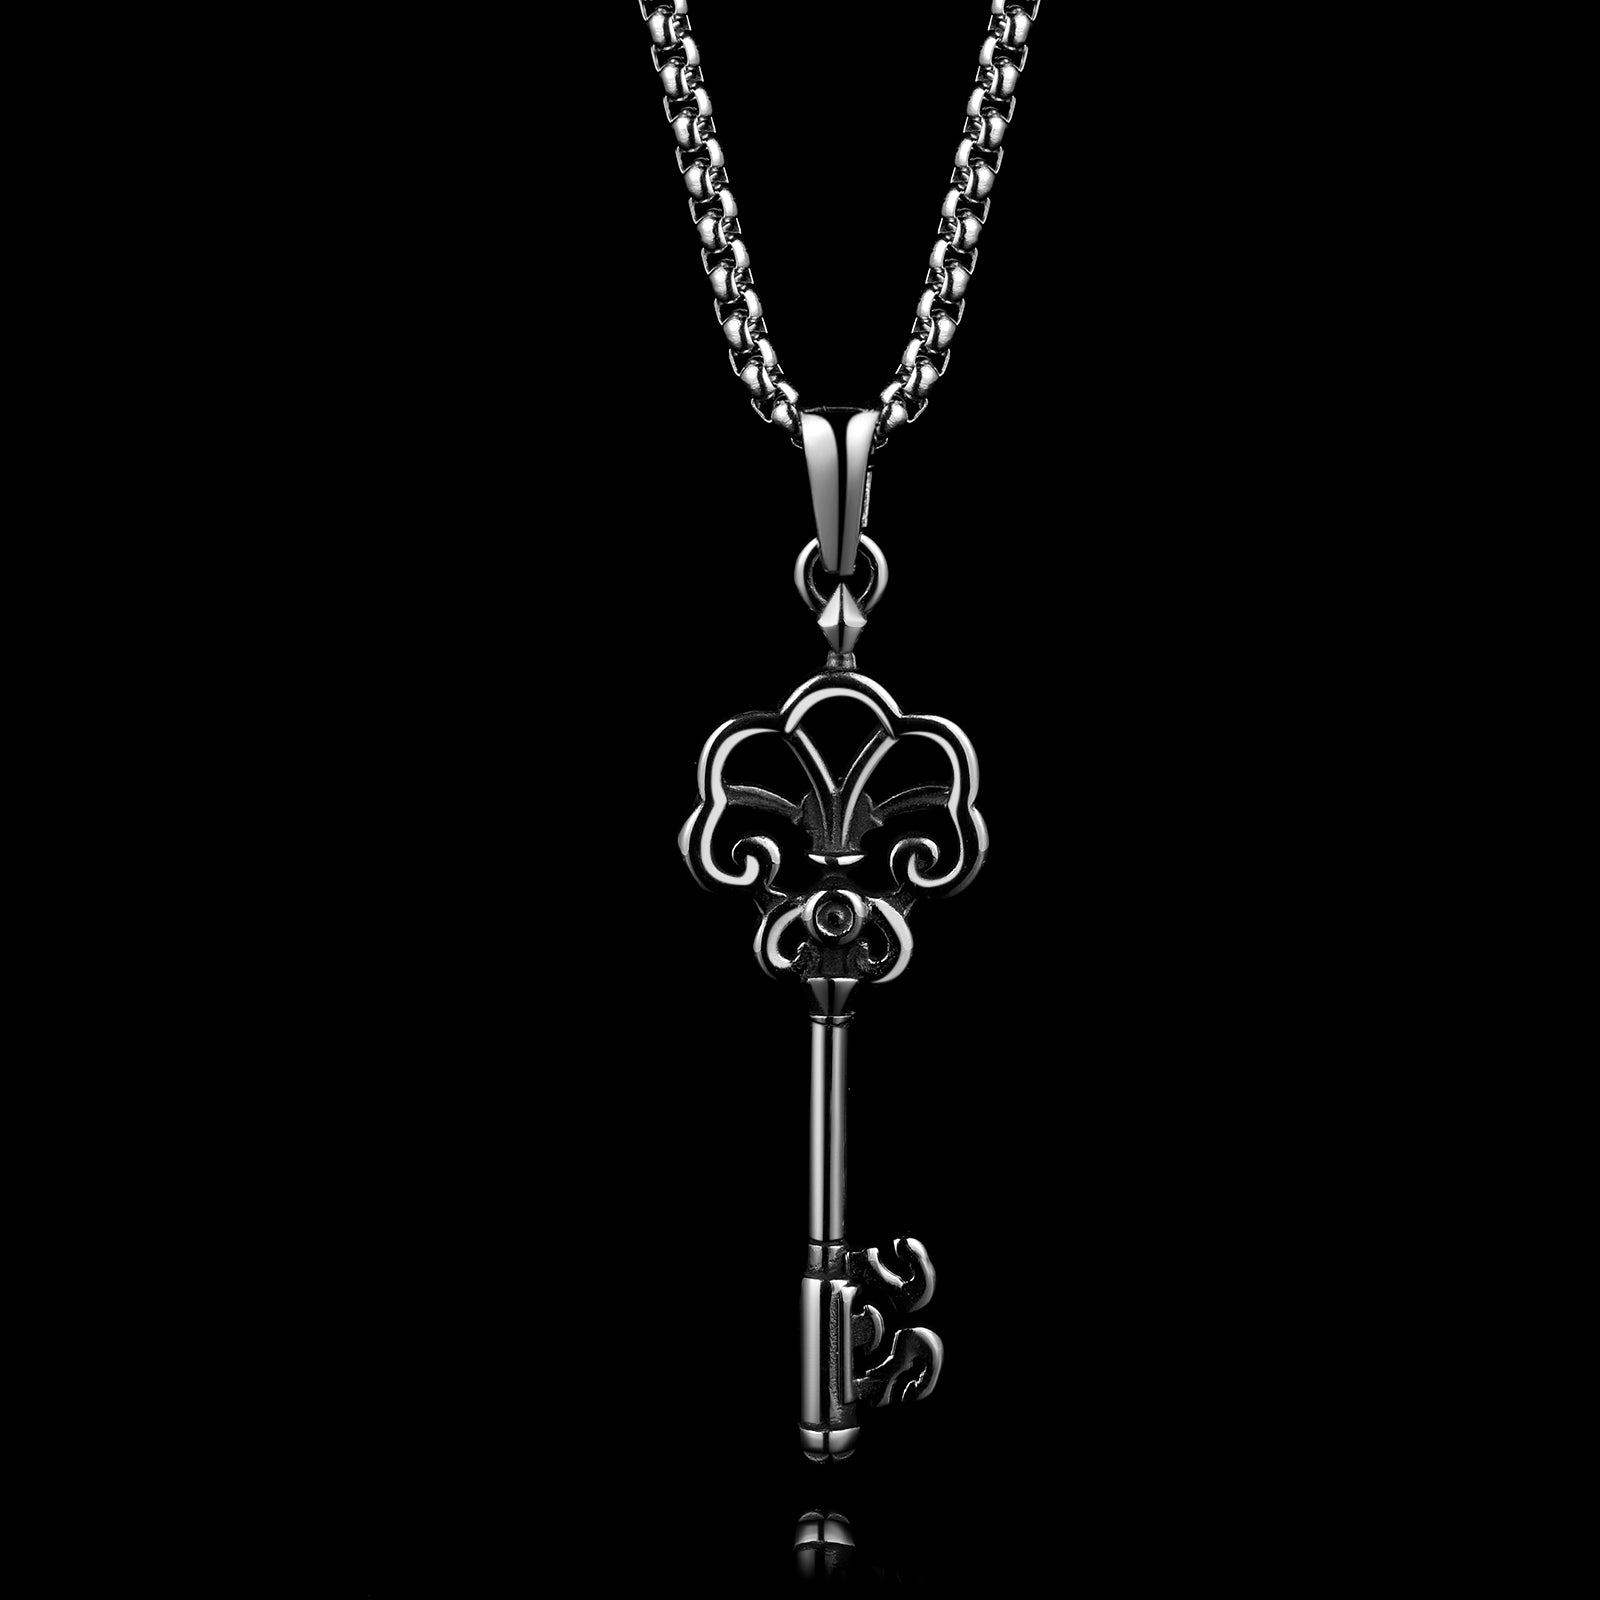 THE KEY TO LIFE. - NECKLACE